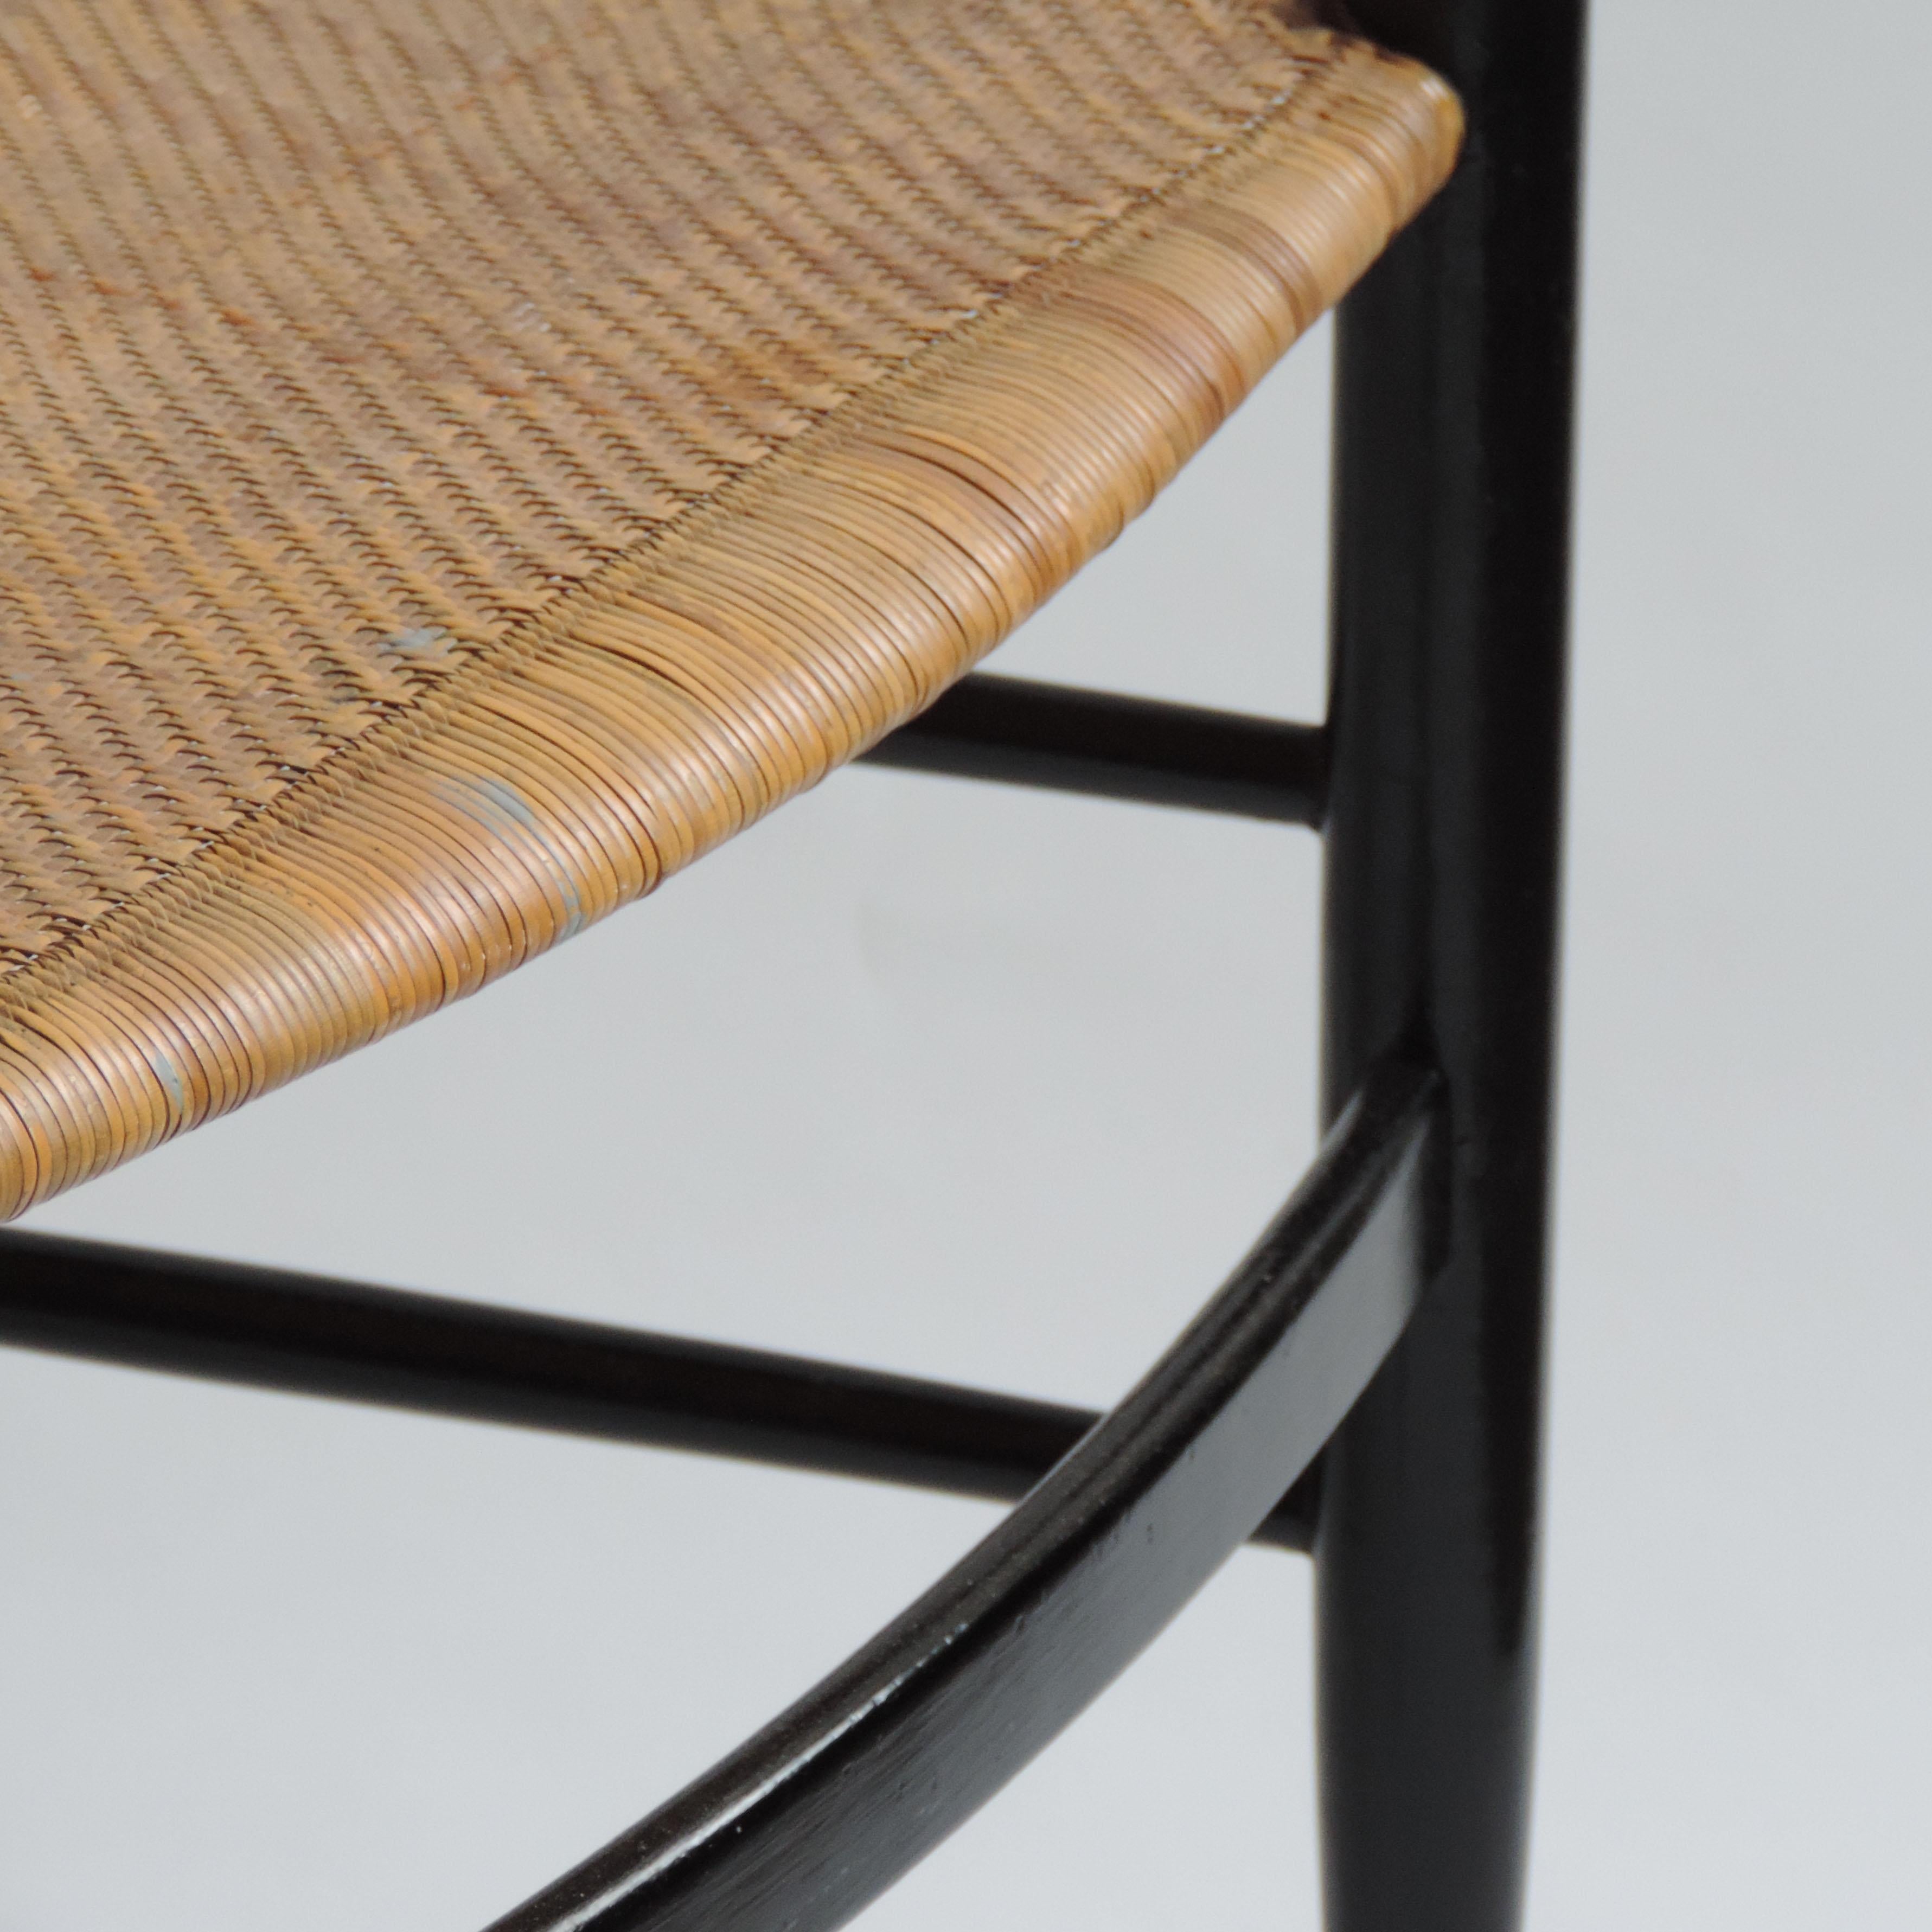 Wicker Single Chiavarina Mod. S1 chair by Azucena, Italy, 1950s For Sale